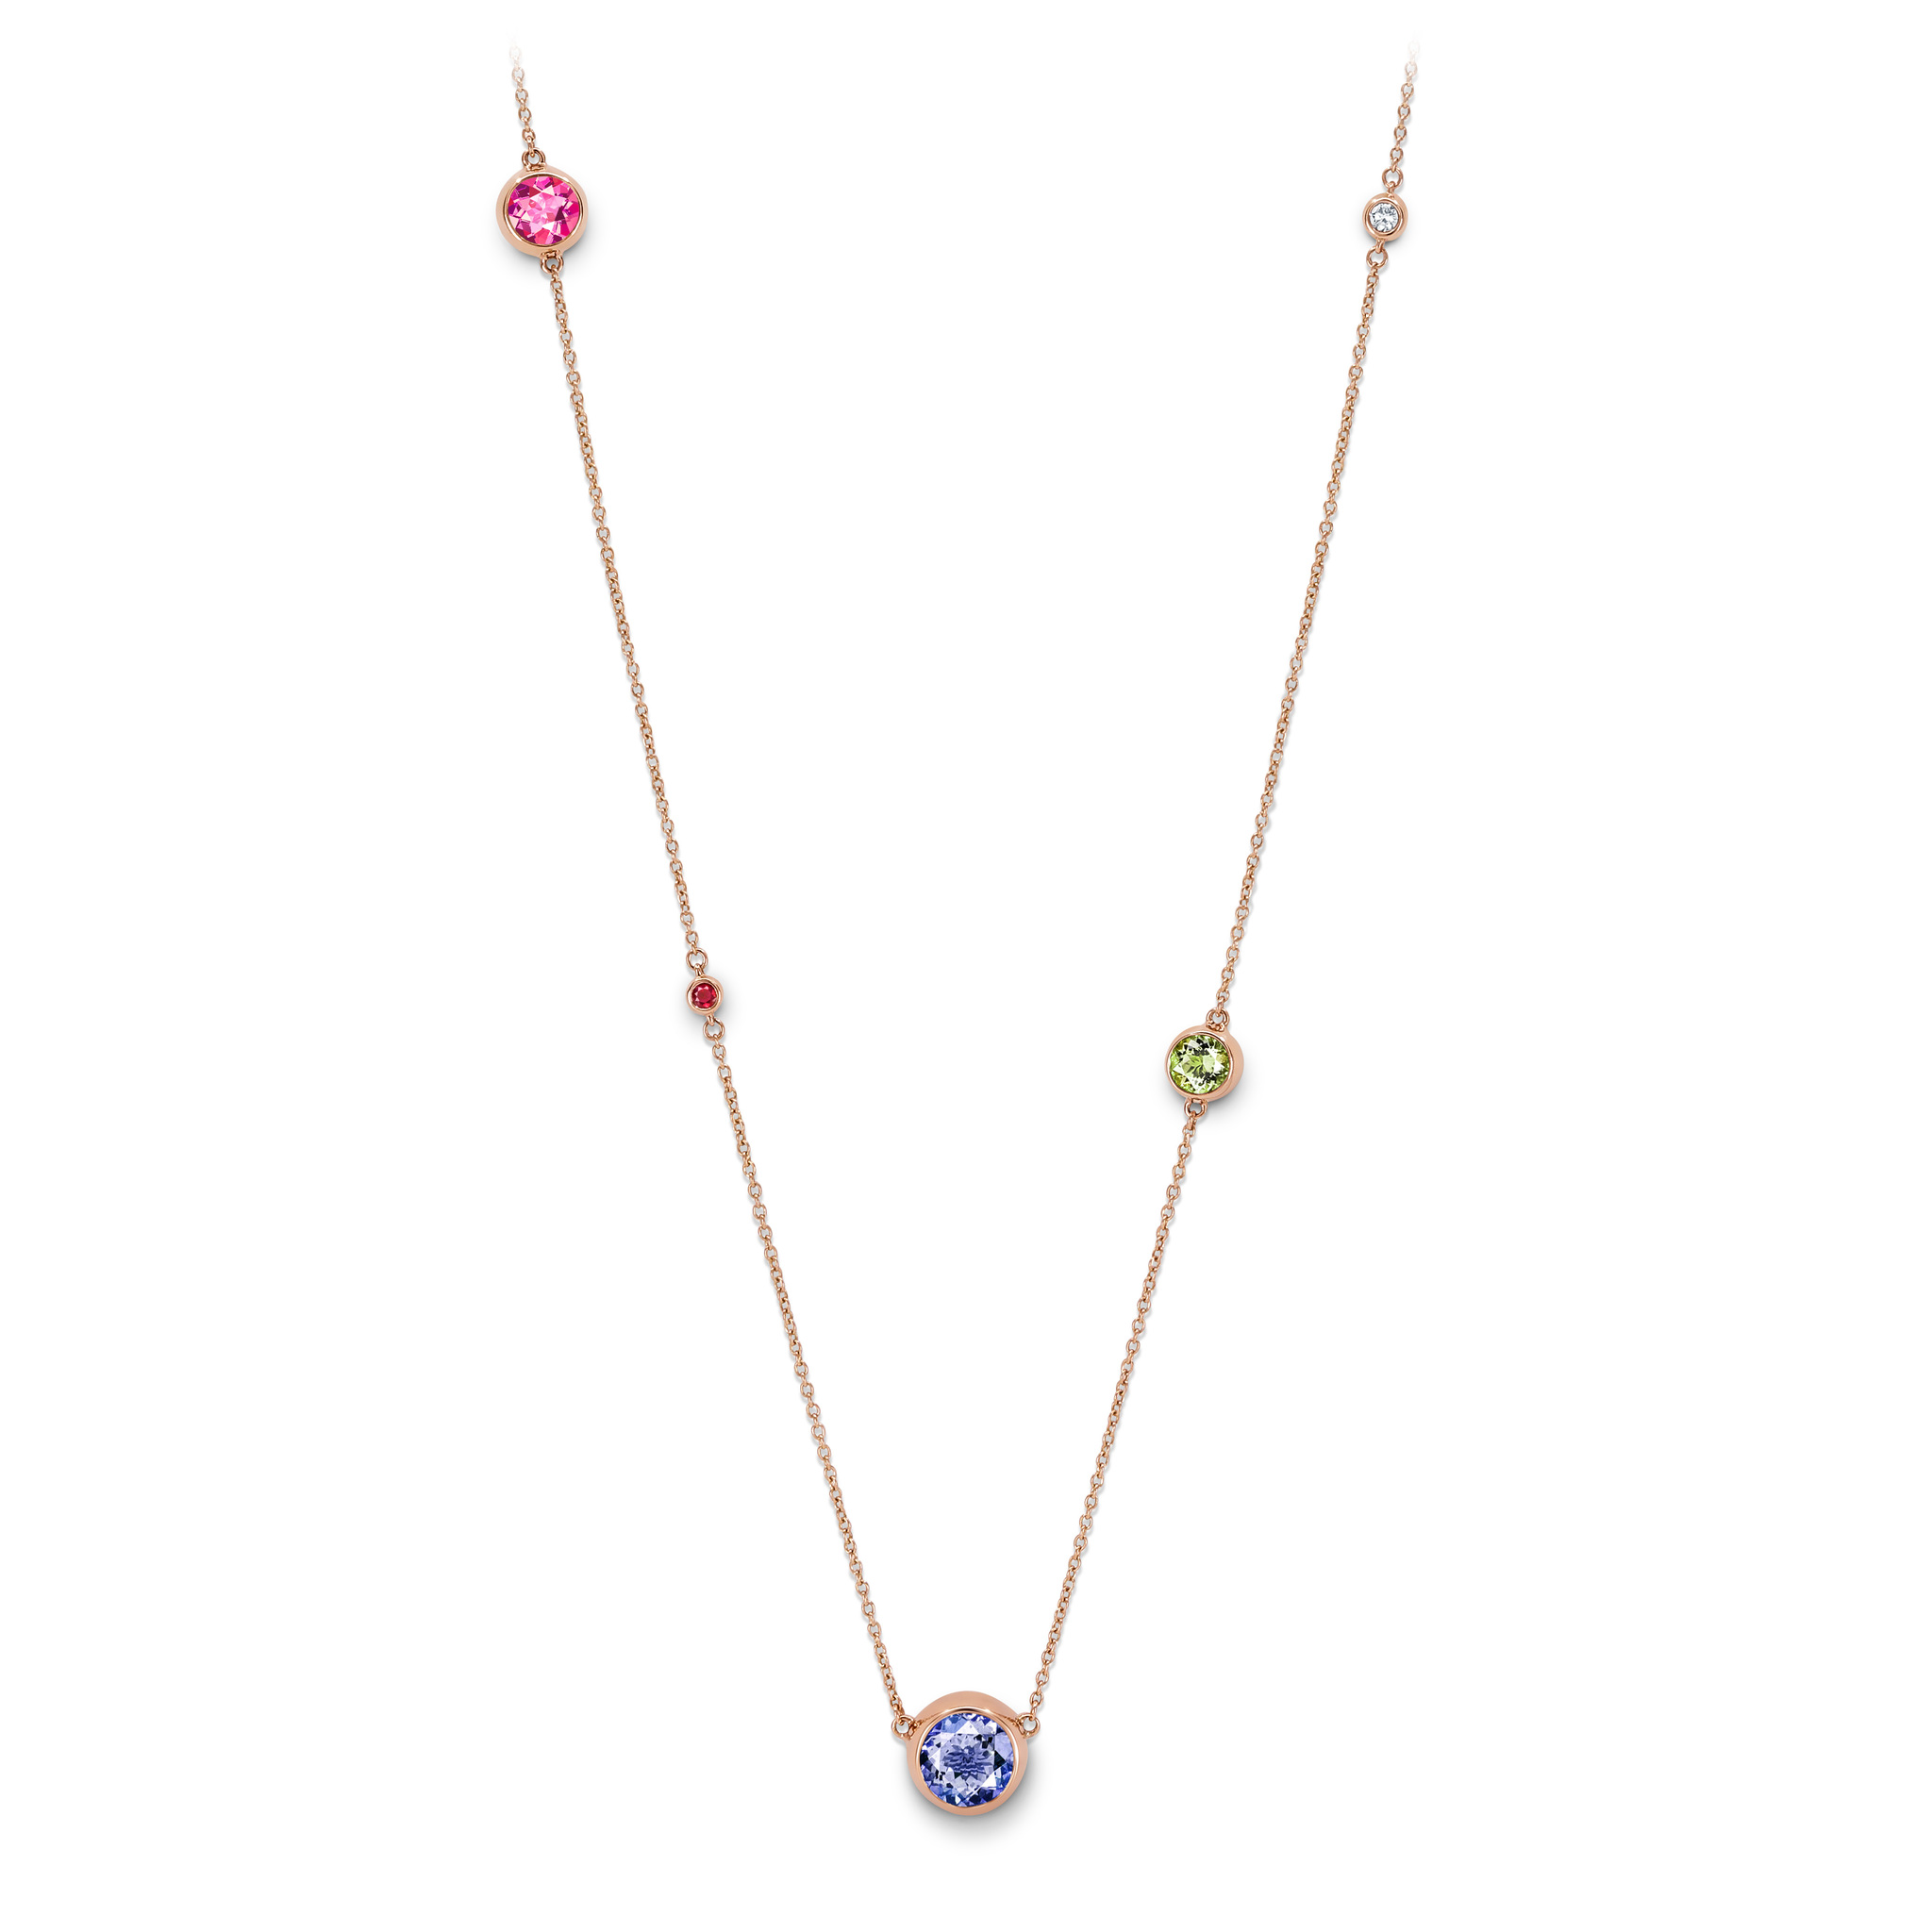 Necklace with coloured gemstones